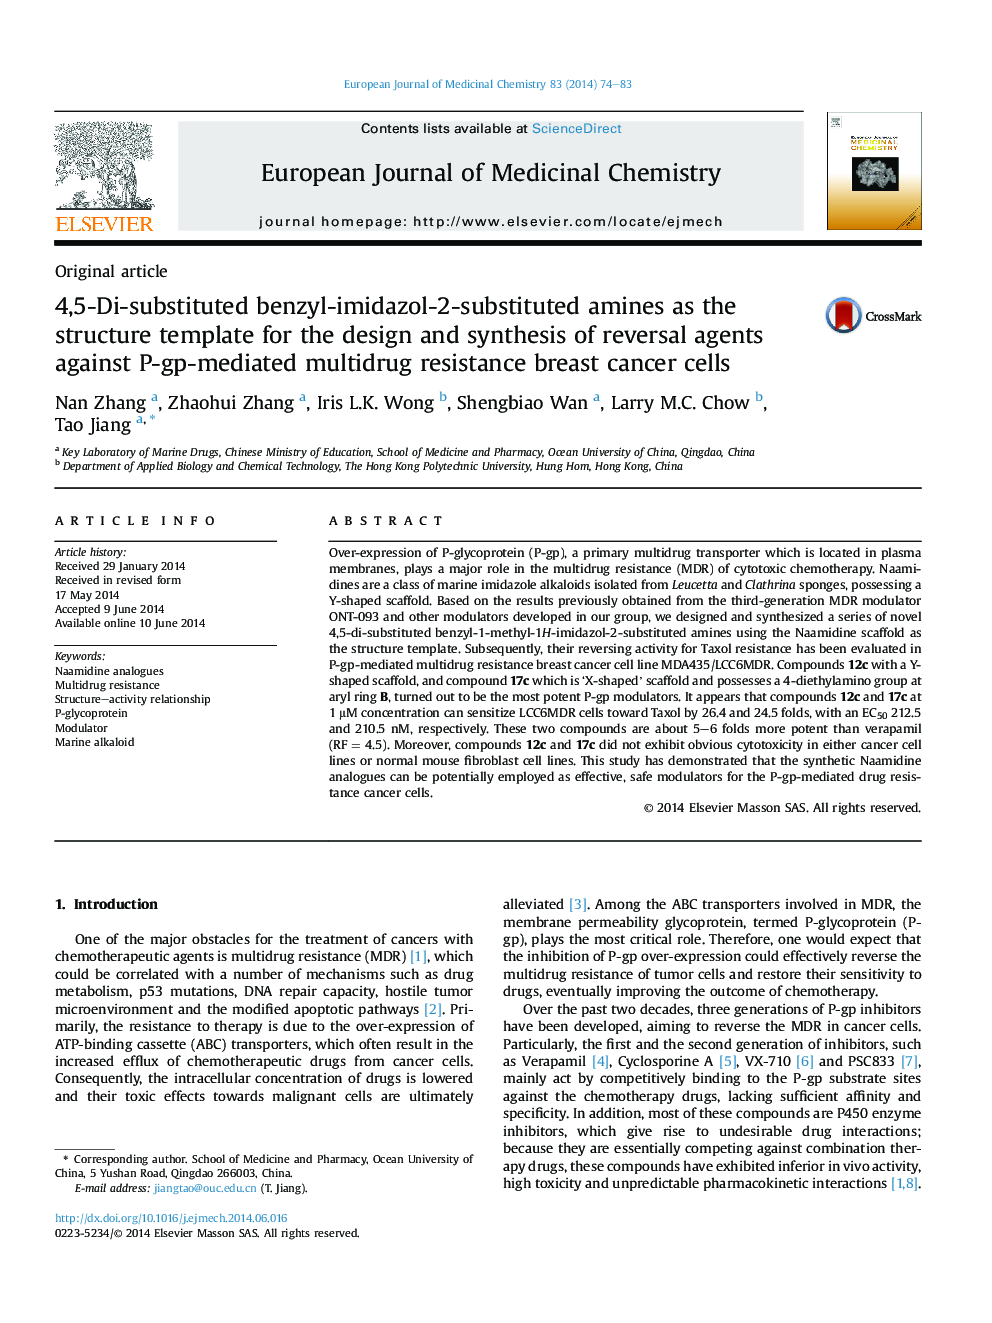 4,5-Di-substituted benzyl-imidazol-2-substituted amines as the structure template for the design and synthesis of reversal agents against P-gp-mediated multidrug resistance breast cancer cells